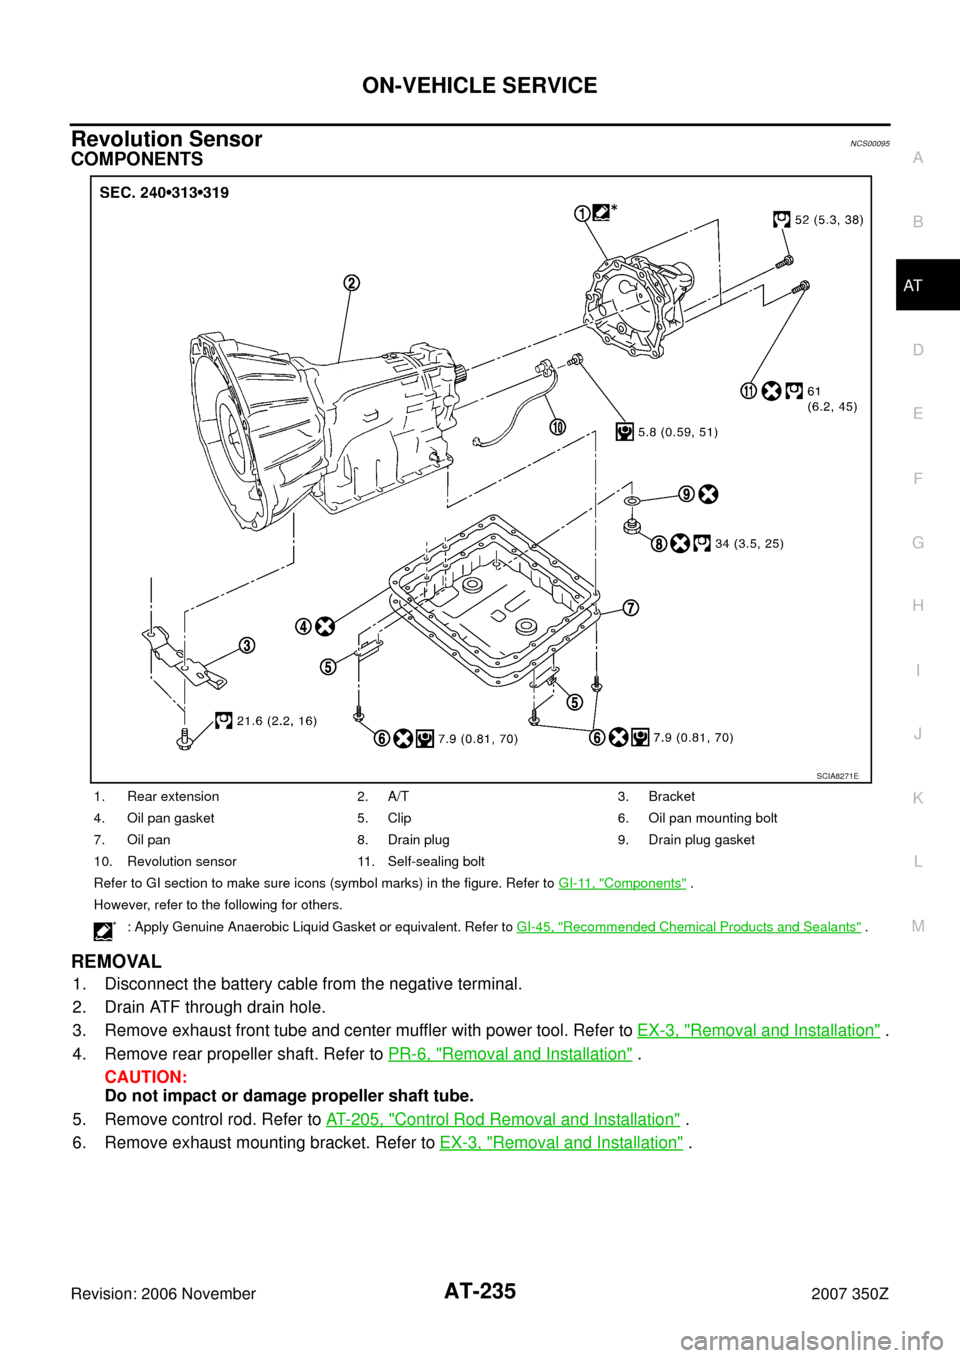 NISSAN 350Z 2007 Z33 Automatic Transmission Workshop Manual ON-VEHICLE SERVICE
AT-235
D
E
F
G
H
I
J
K
L
MA
B
AT
Revision: 2006 November2007 350Z
Revolution SensorNCS00095
COMPONENTS
REMOVAL
1. Disconnect the battery cable from the negative terminal.
2. Drain A